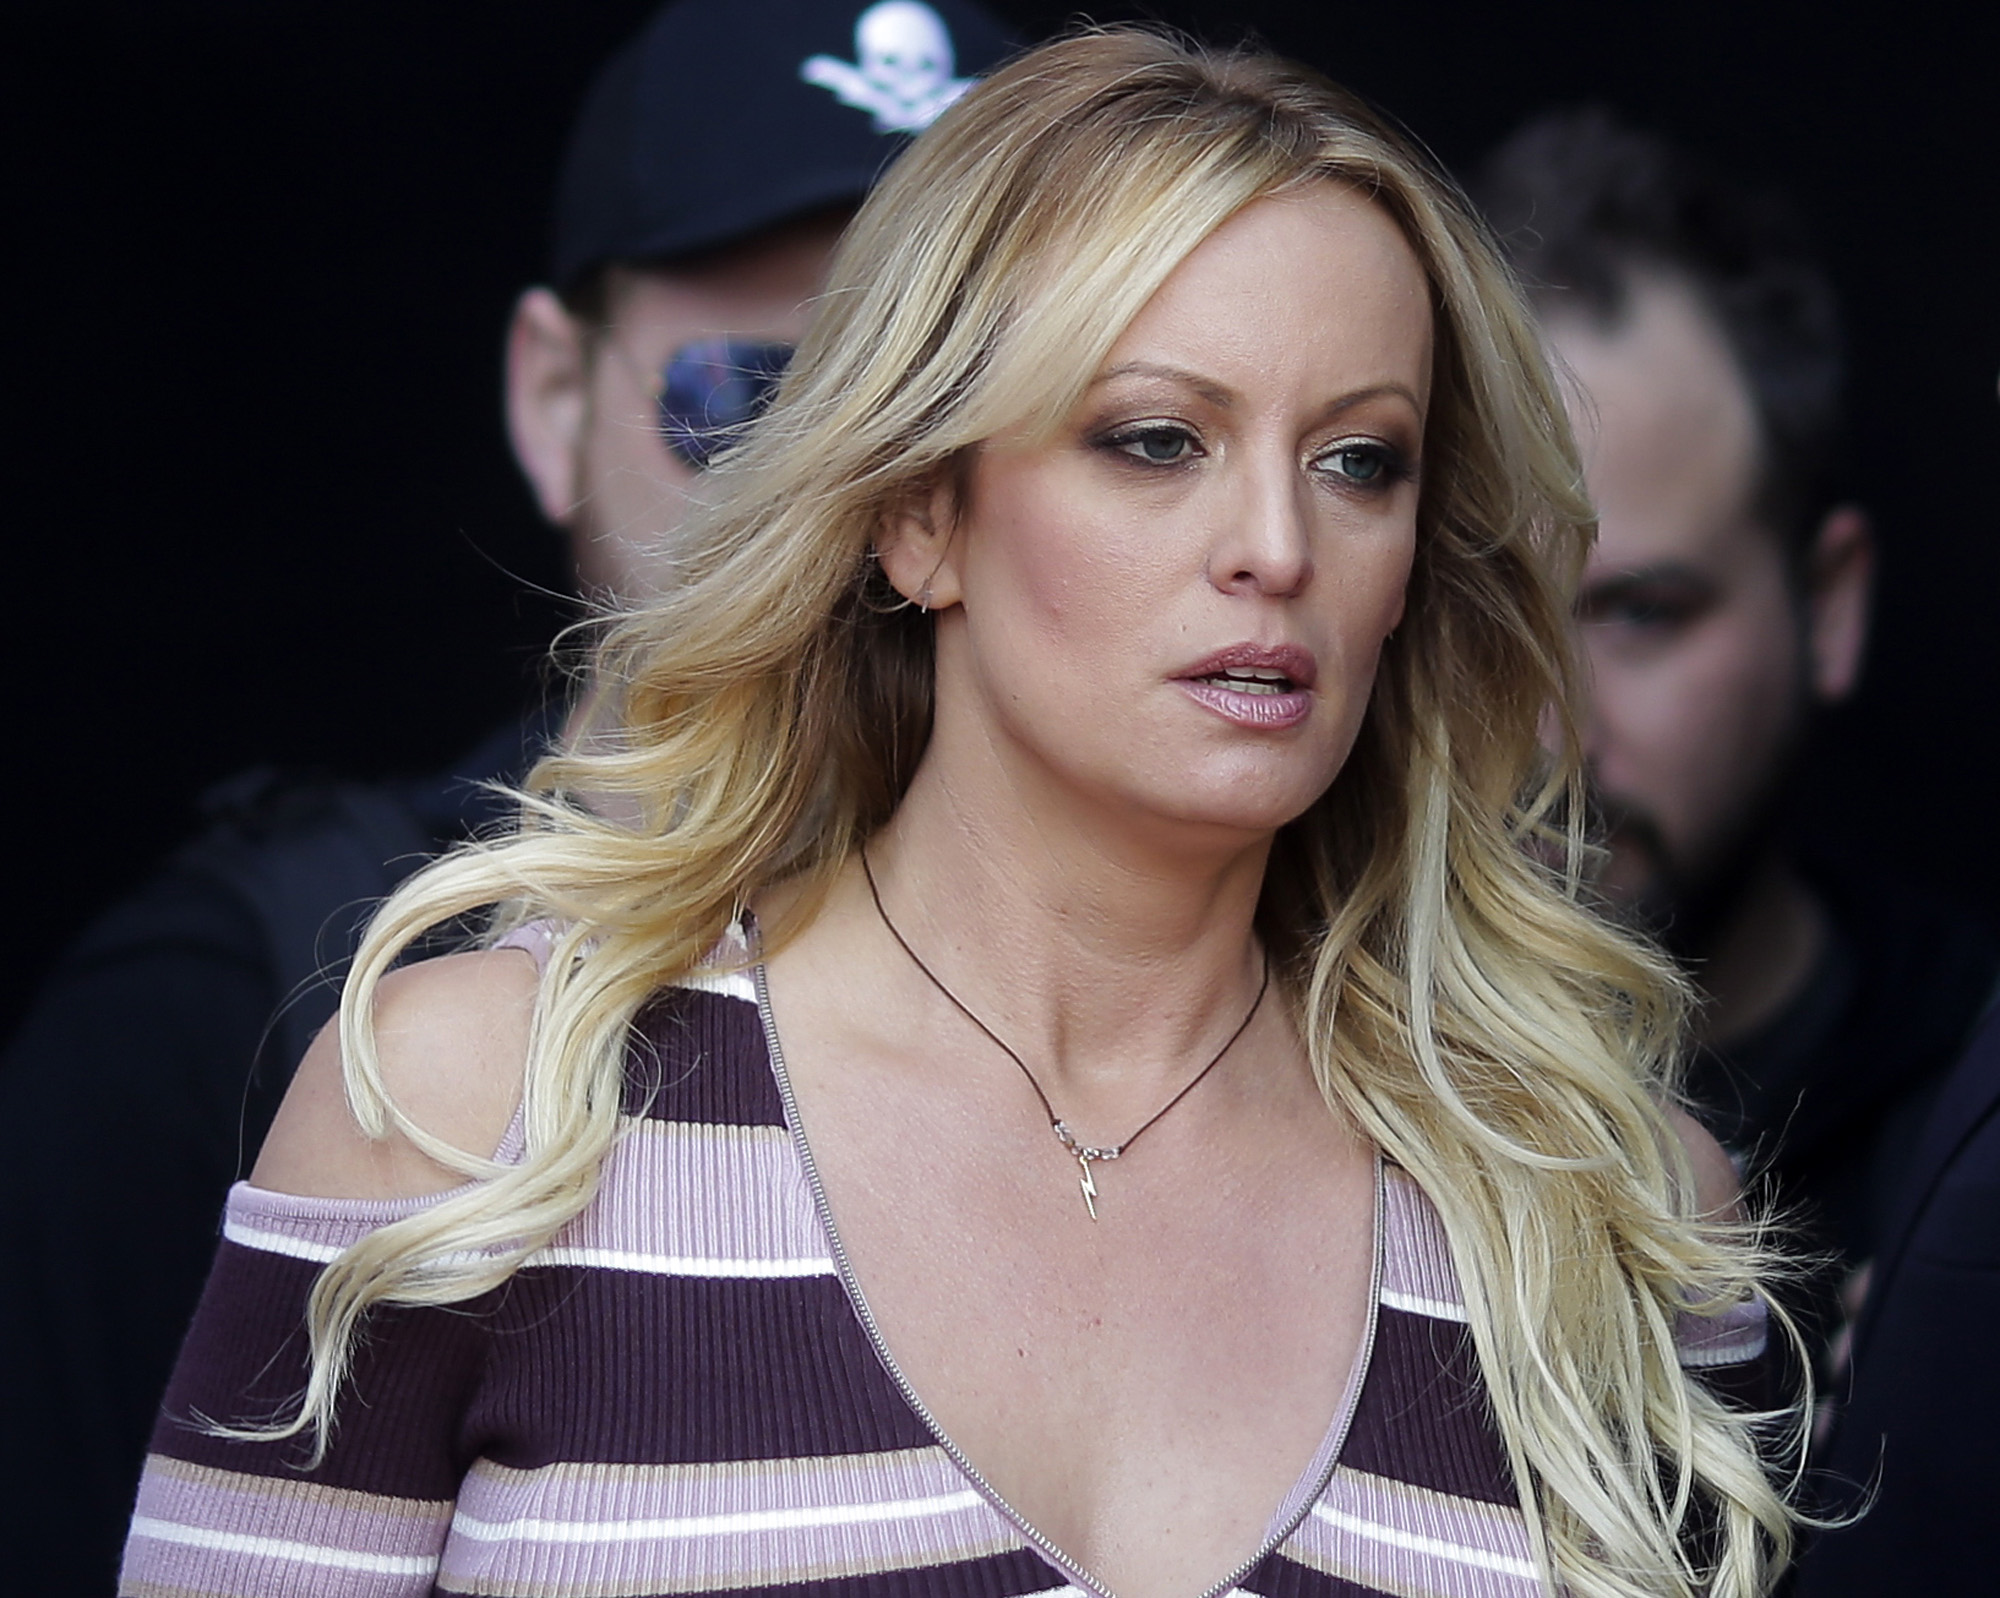 PHOTO: Adult film actress Stormy Daniels arrives for the opening of the adult entertainment fair "Venus," in Berlin, Oct. 11, 2018.